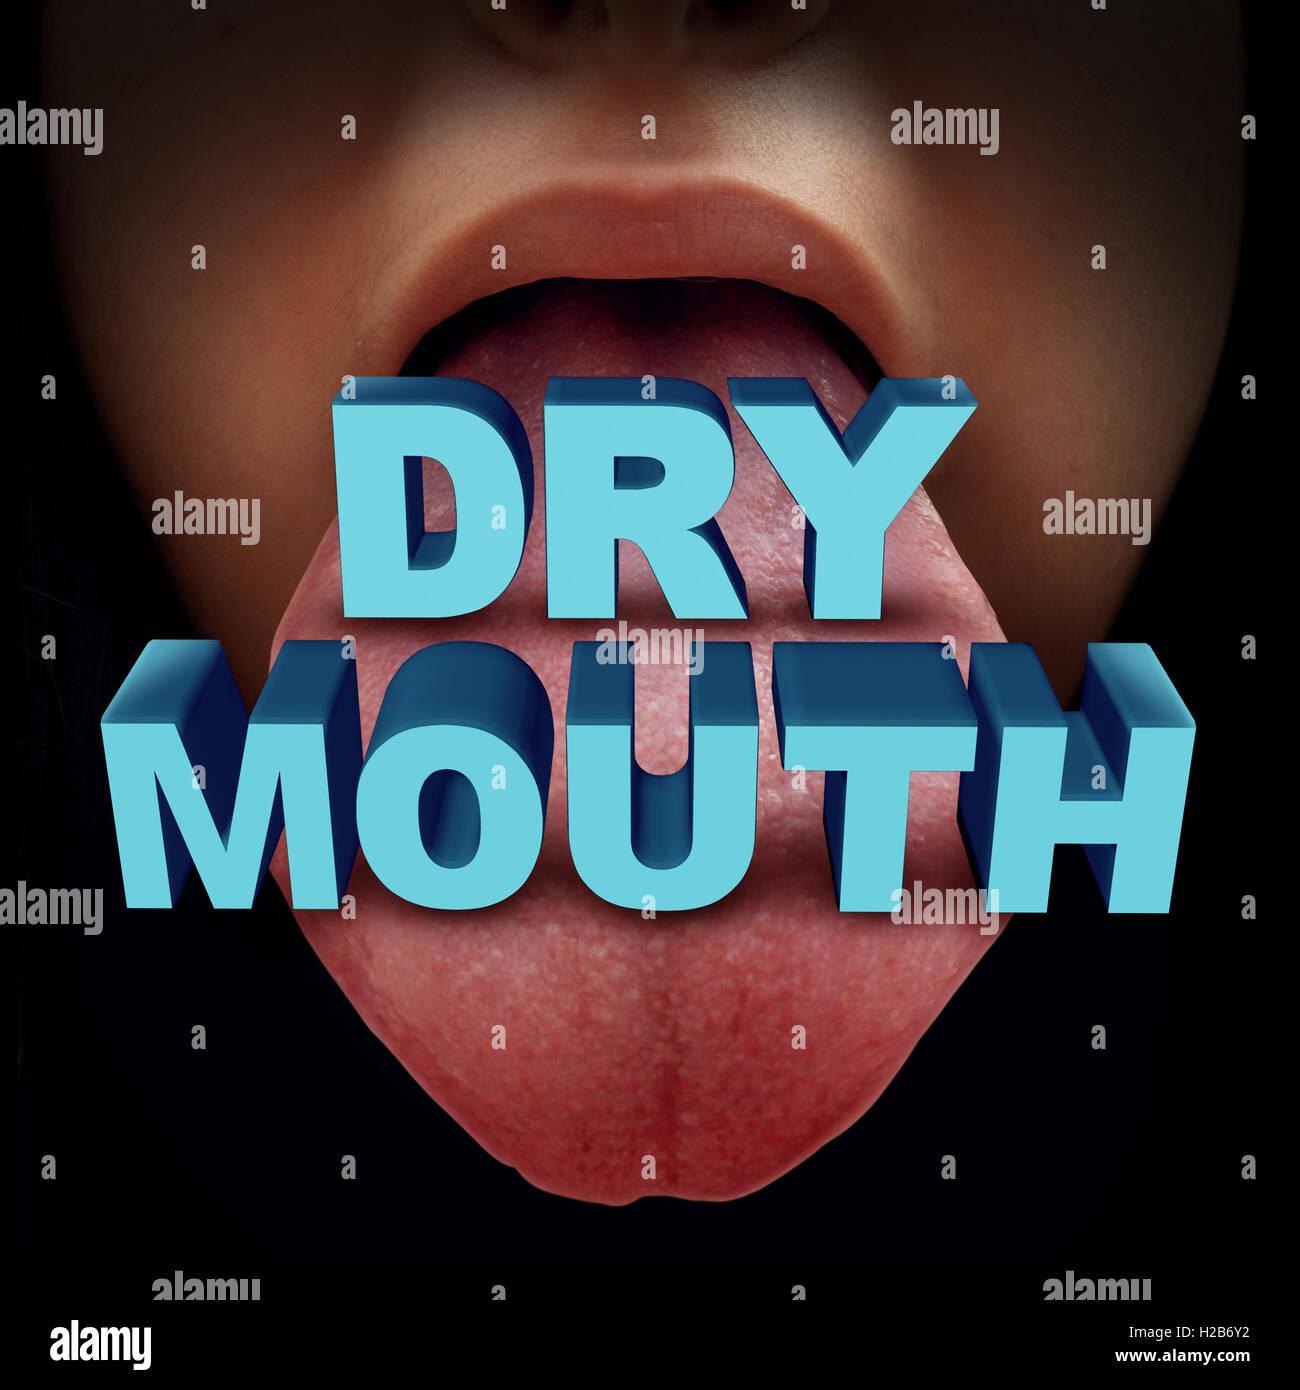 Dry mouth medical concept or xerostomia due to lack of saliva as a human tongue with  text as a health care symbol for oral disease or illness with 3D illustration elements. Stock Photo